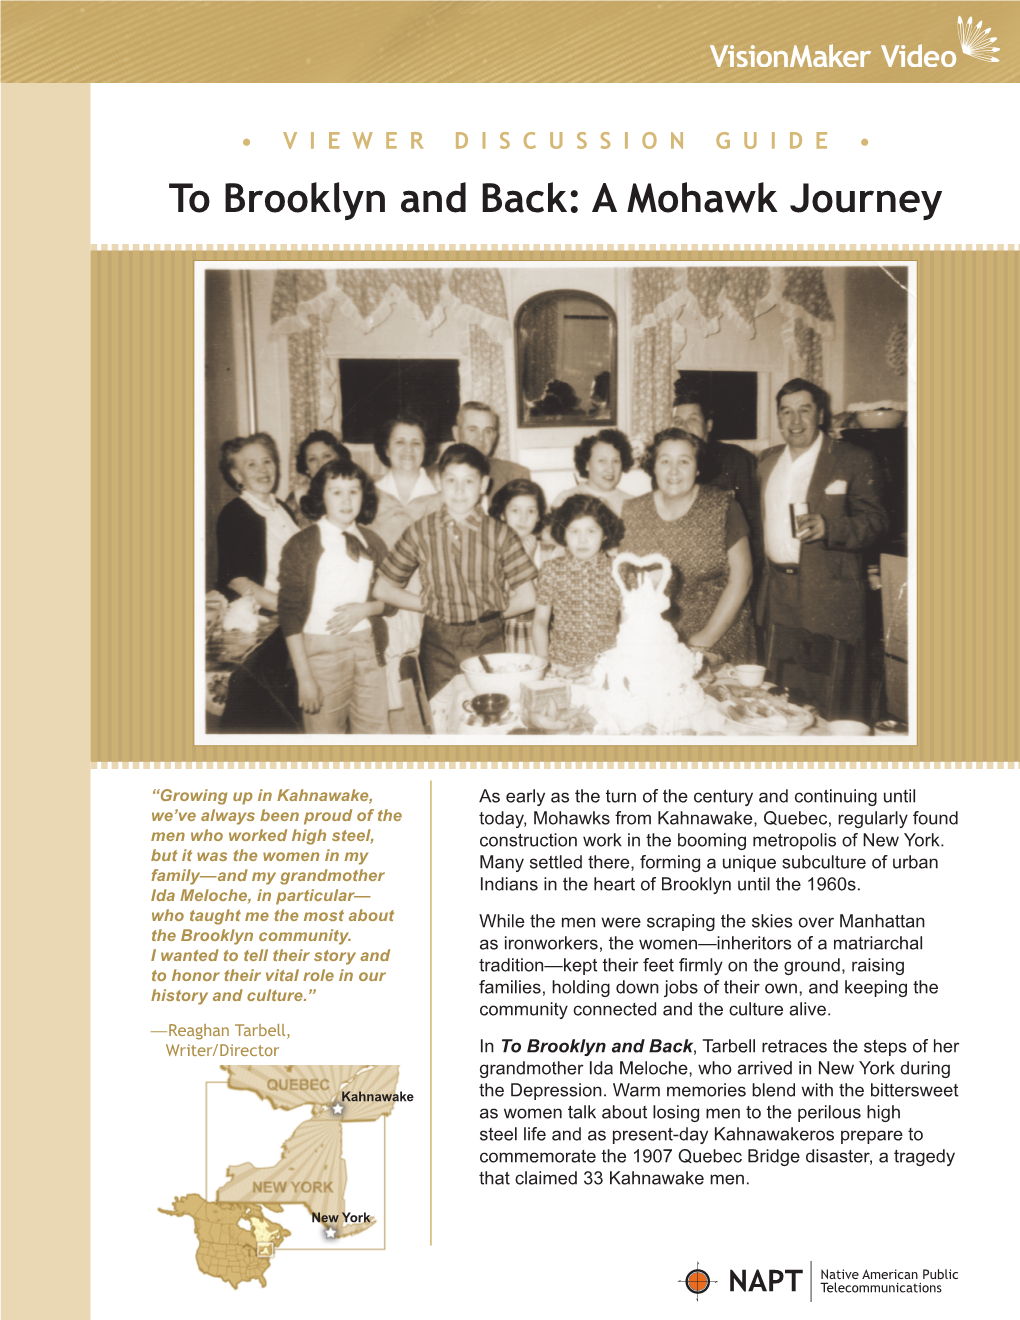 To Brooklyn and Back: a Mohawk Journey